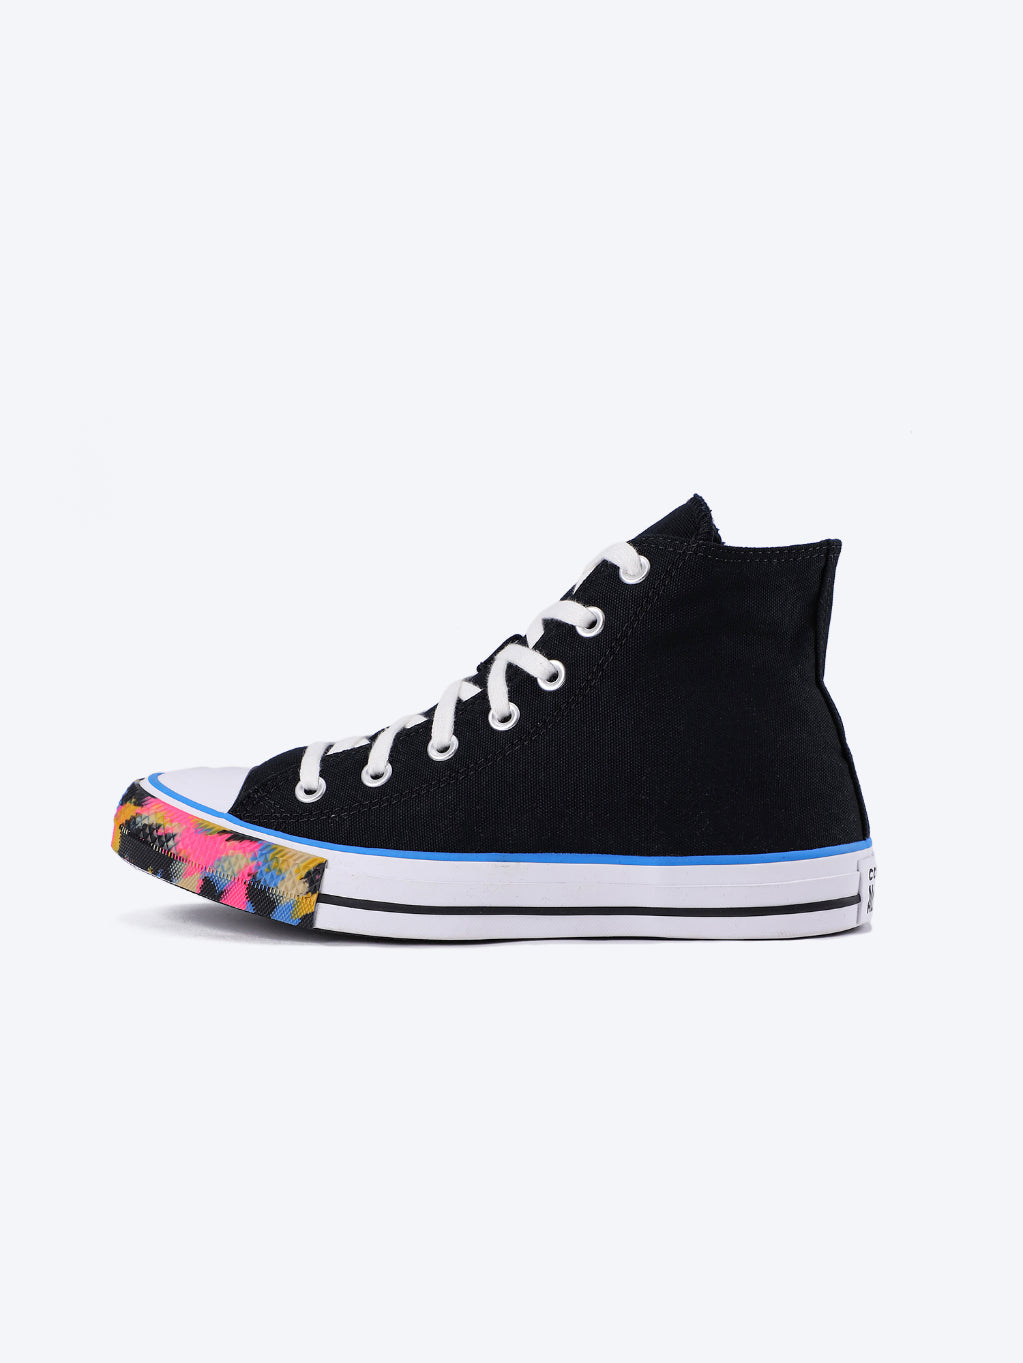 Converse Women's Chuck Taylor All Star Color Flow High Top - 570291C